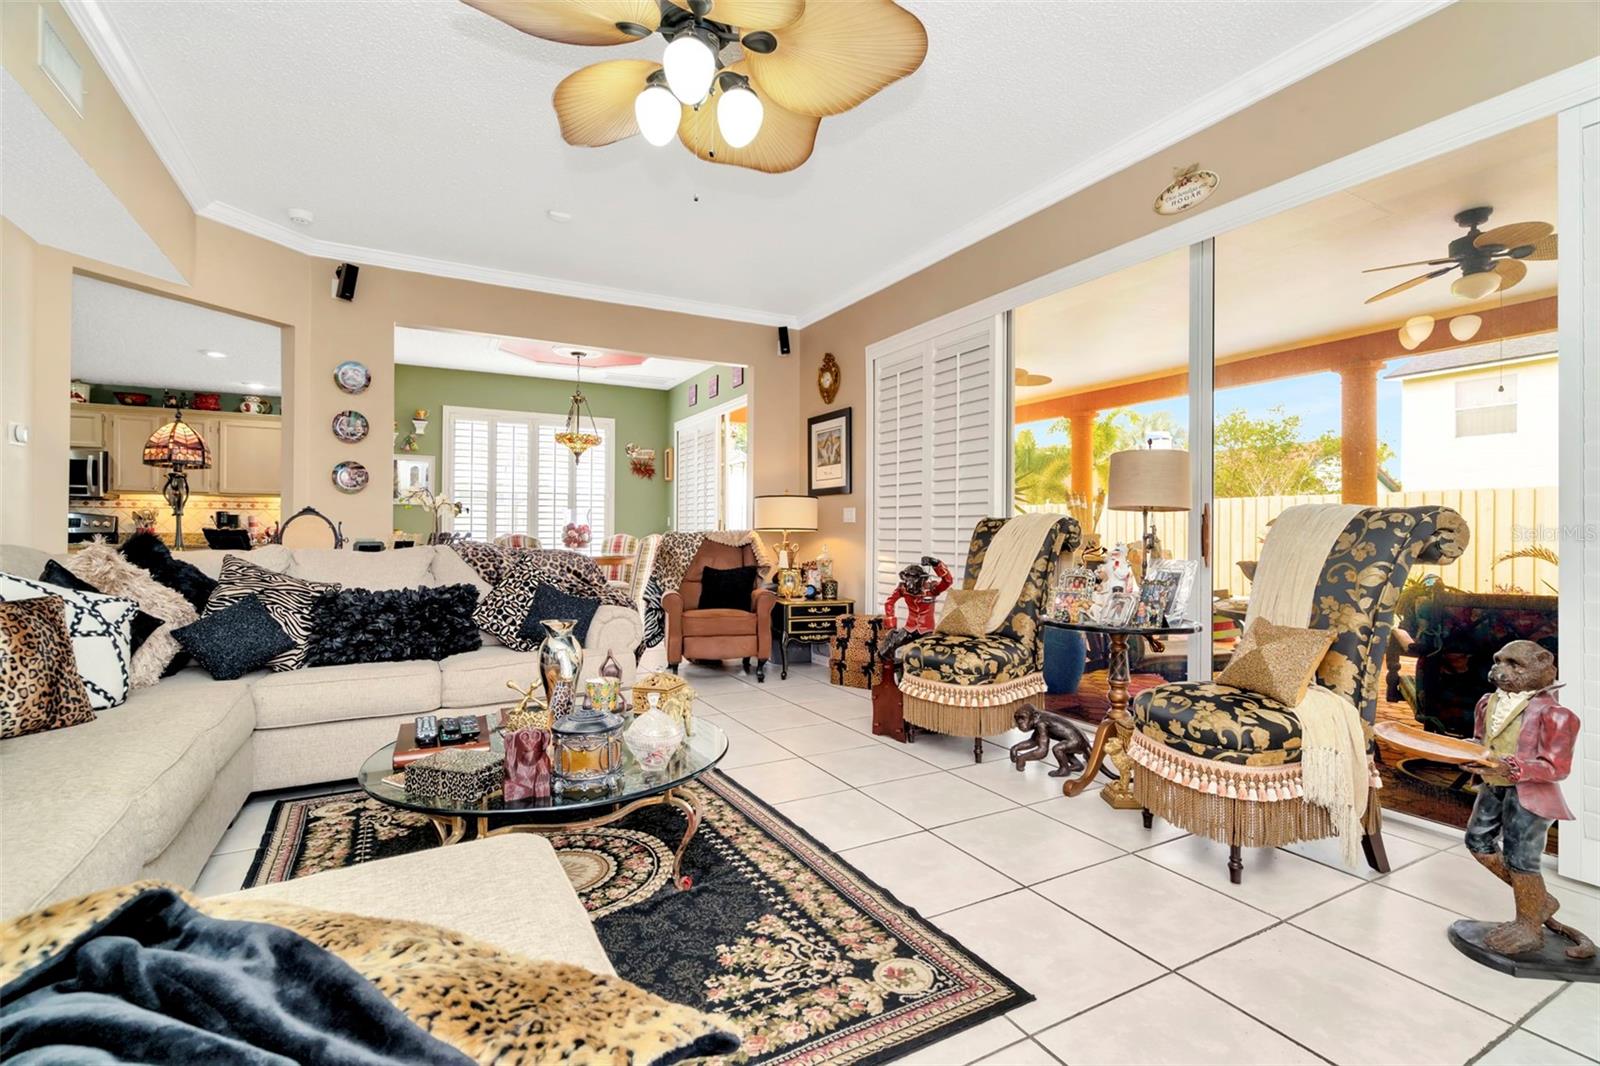 Spacious family room that has views to the pool area. Large Sliders with Plantation shutters as well. Huge upgrade!